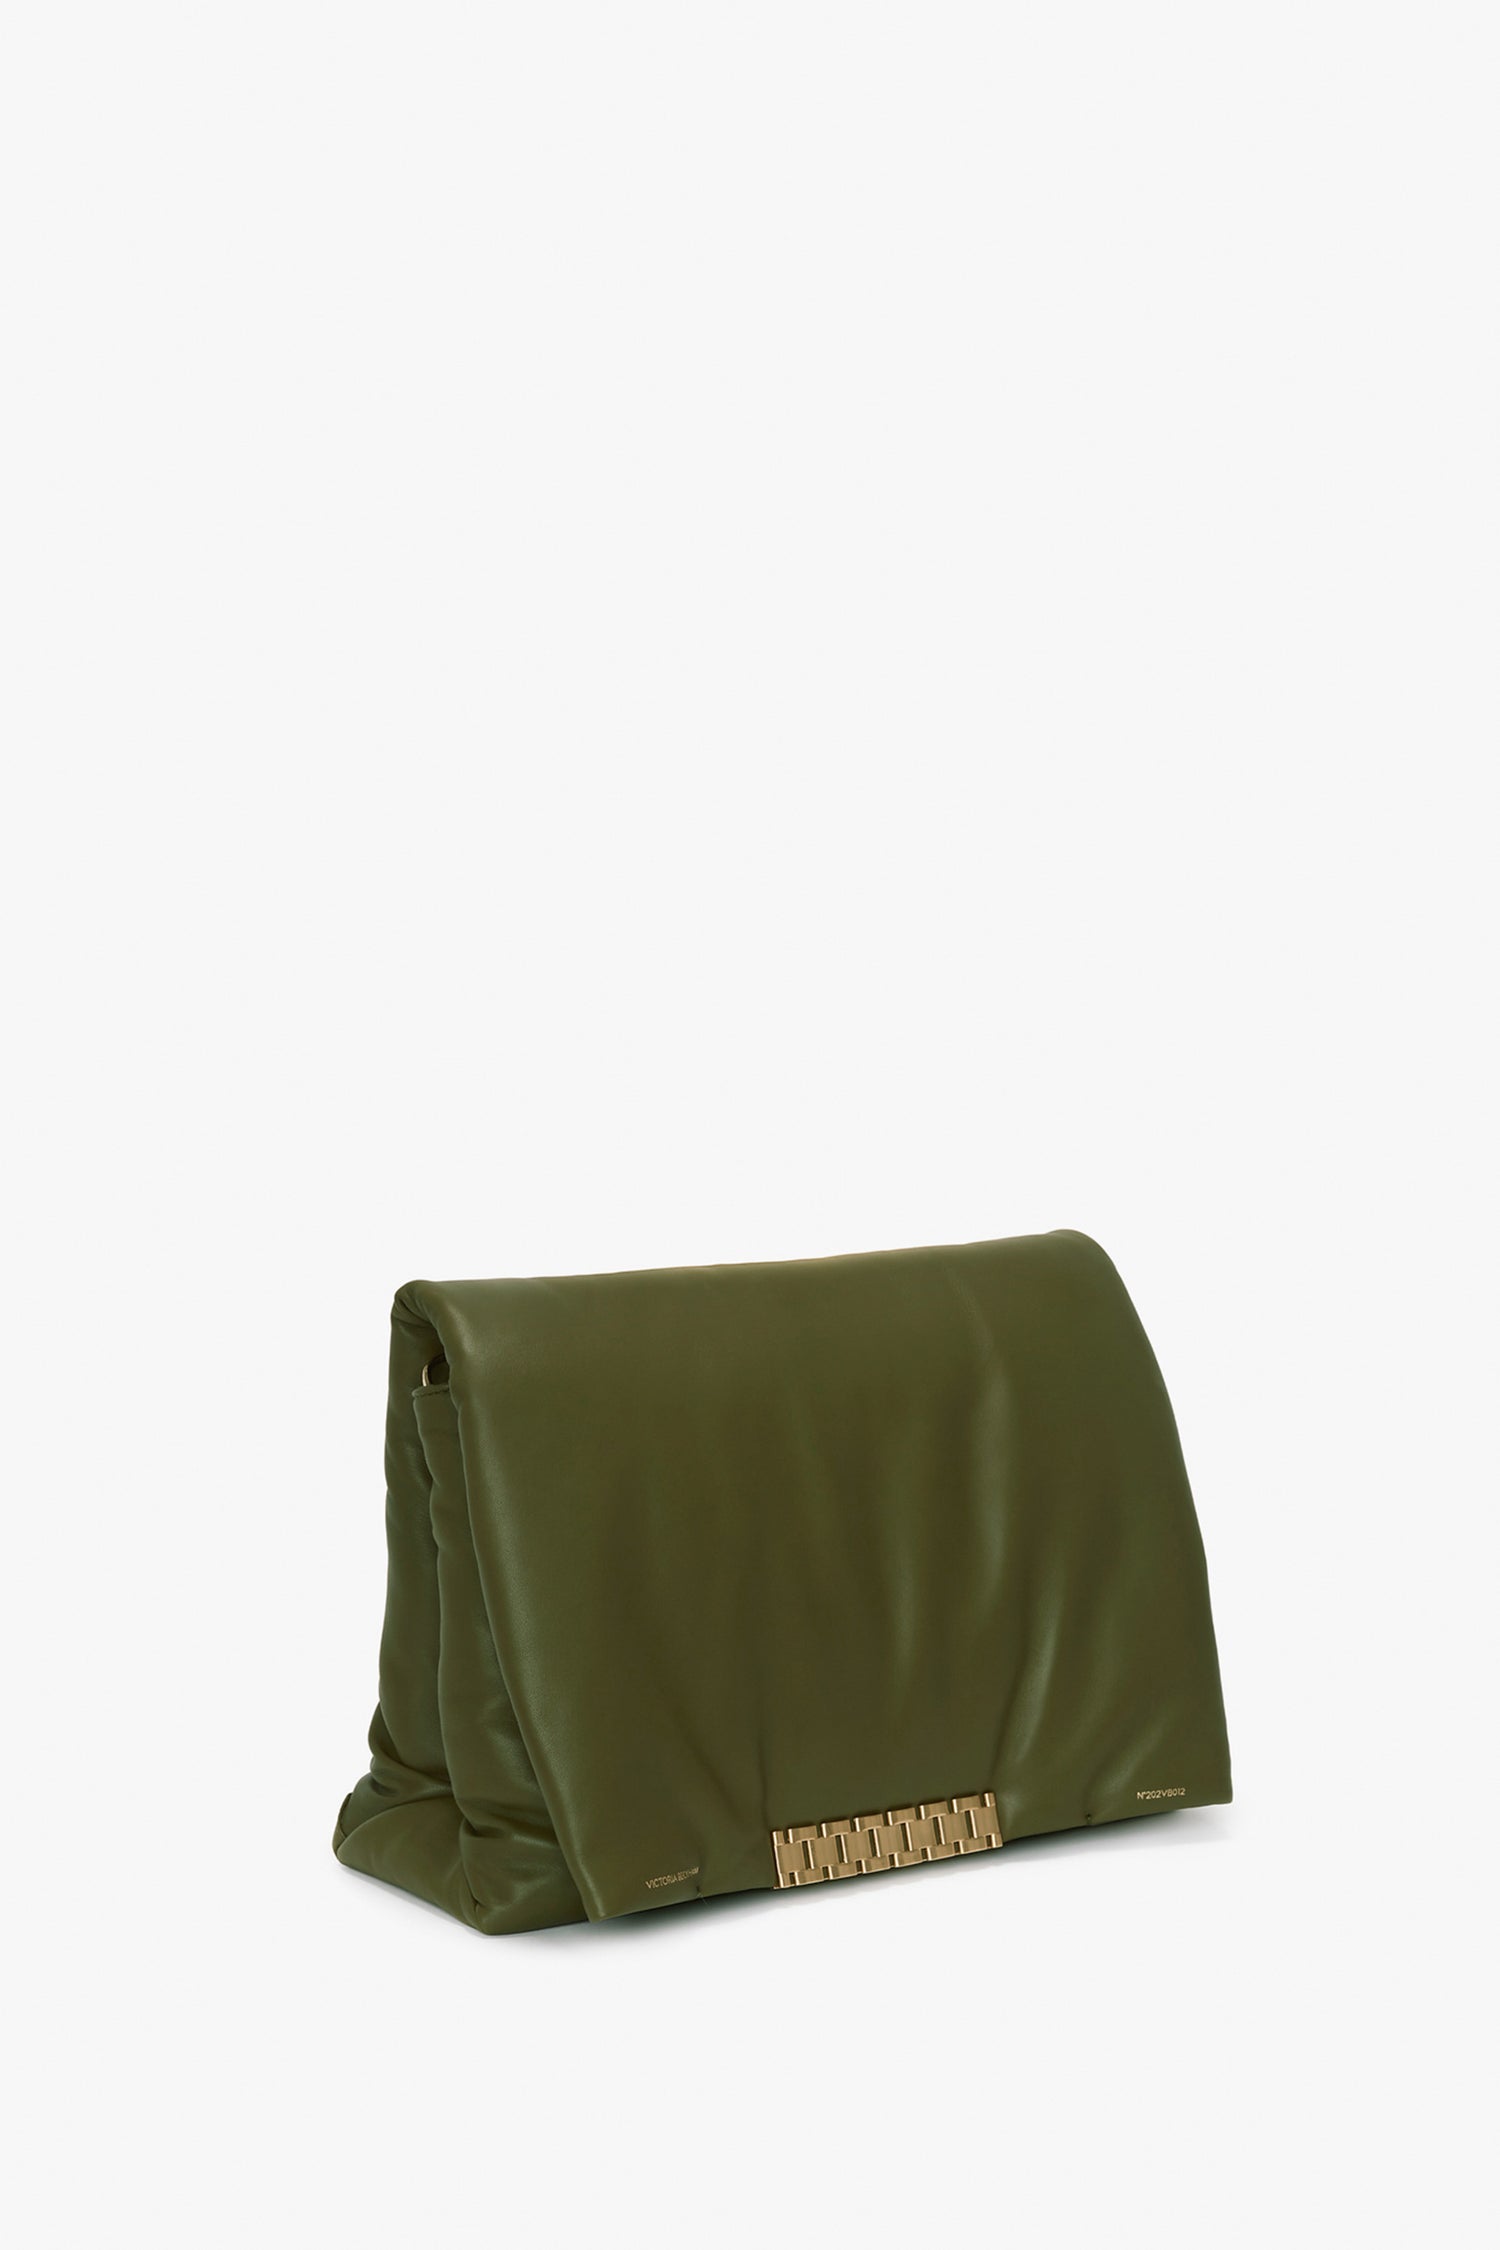 The Victoria Beckham Puffy Jumbo Chain Pouch In Khaki Leather is an olive green, rectangular clutch bag crafted from sheepskin nappa leather with a gold-toned clasp on the lower front and a soft, padded texture.